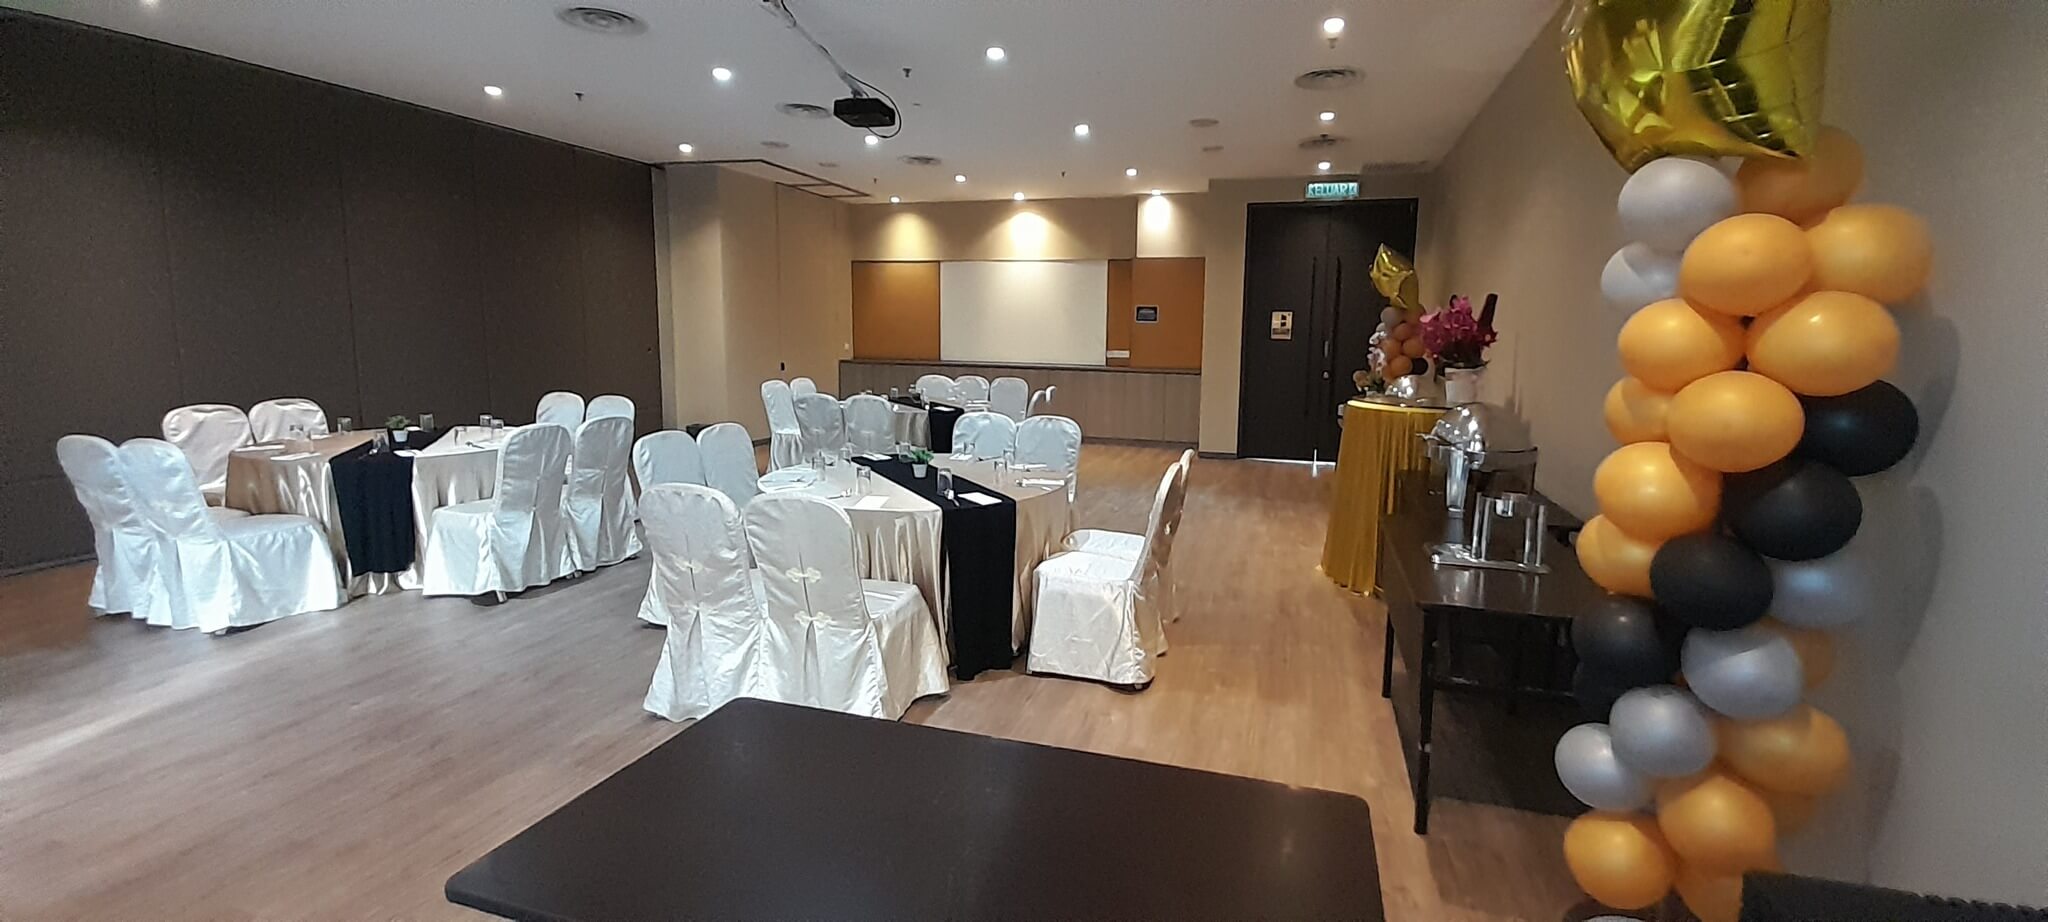 Function Room M1 - Banquet Layout | MTREE Hotel